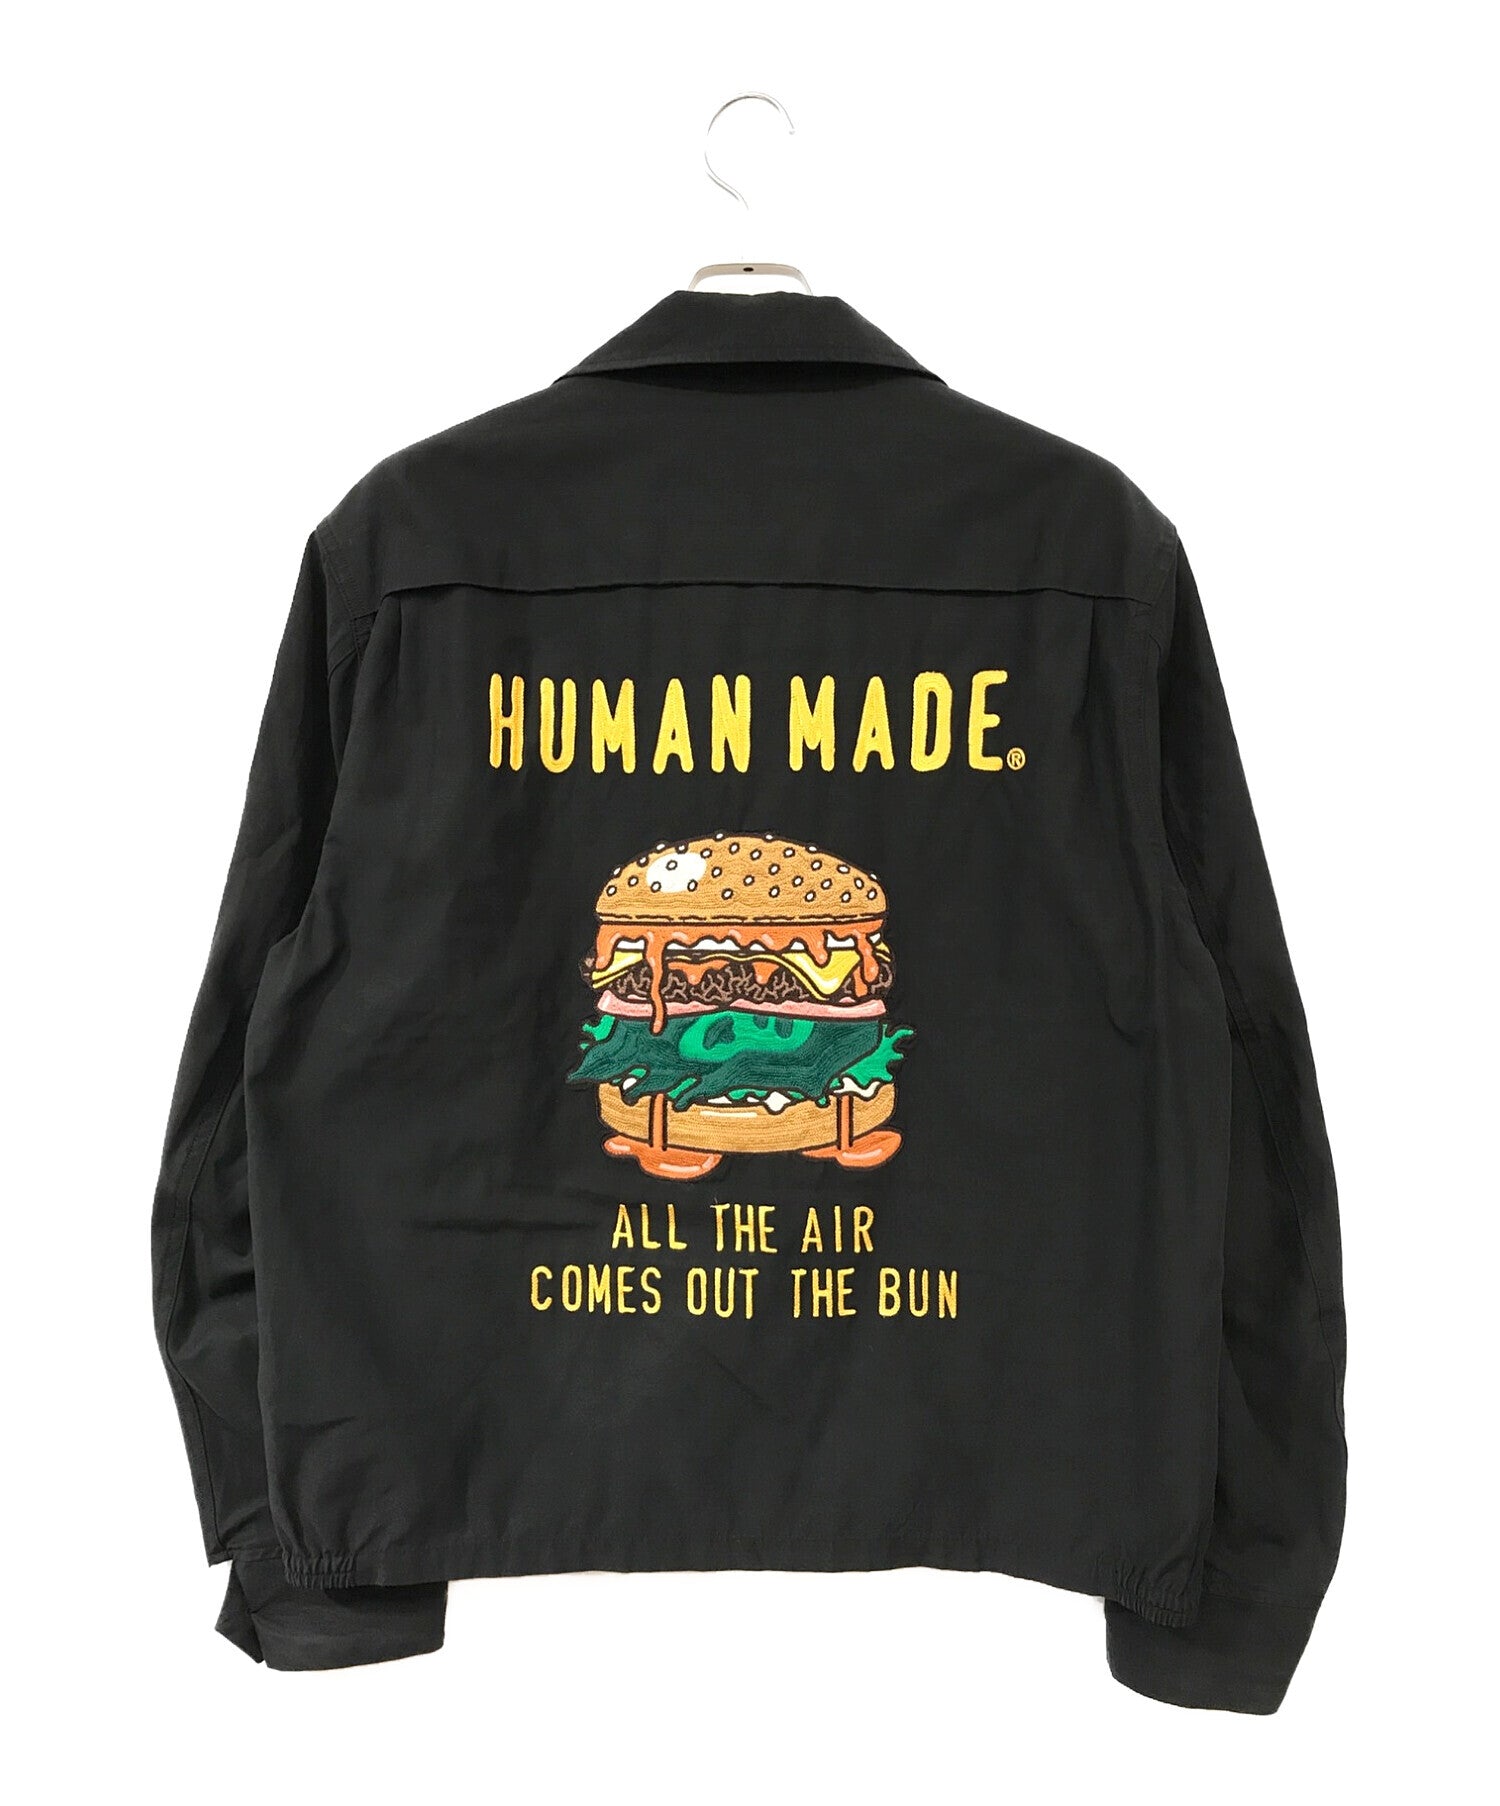 Rags McGREGOR×HUMAN MADE Collaboration back embroidered drizzle